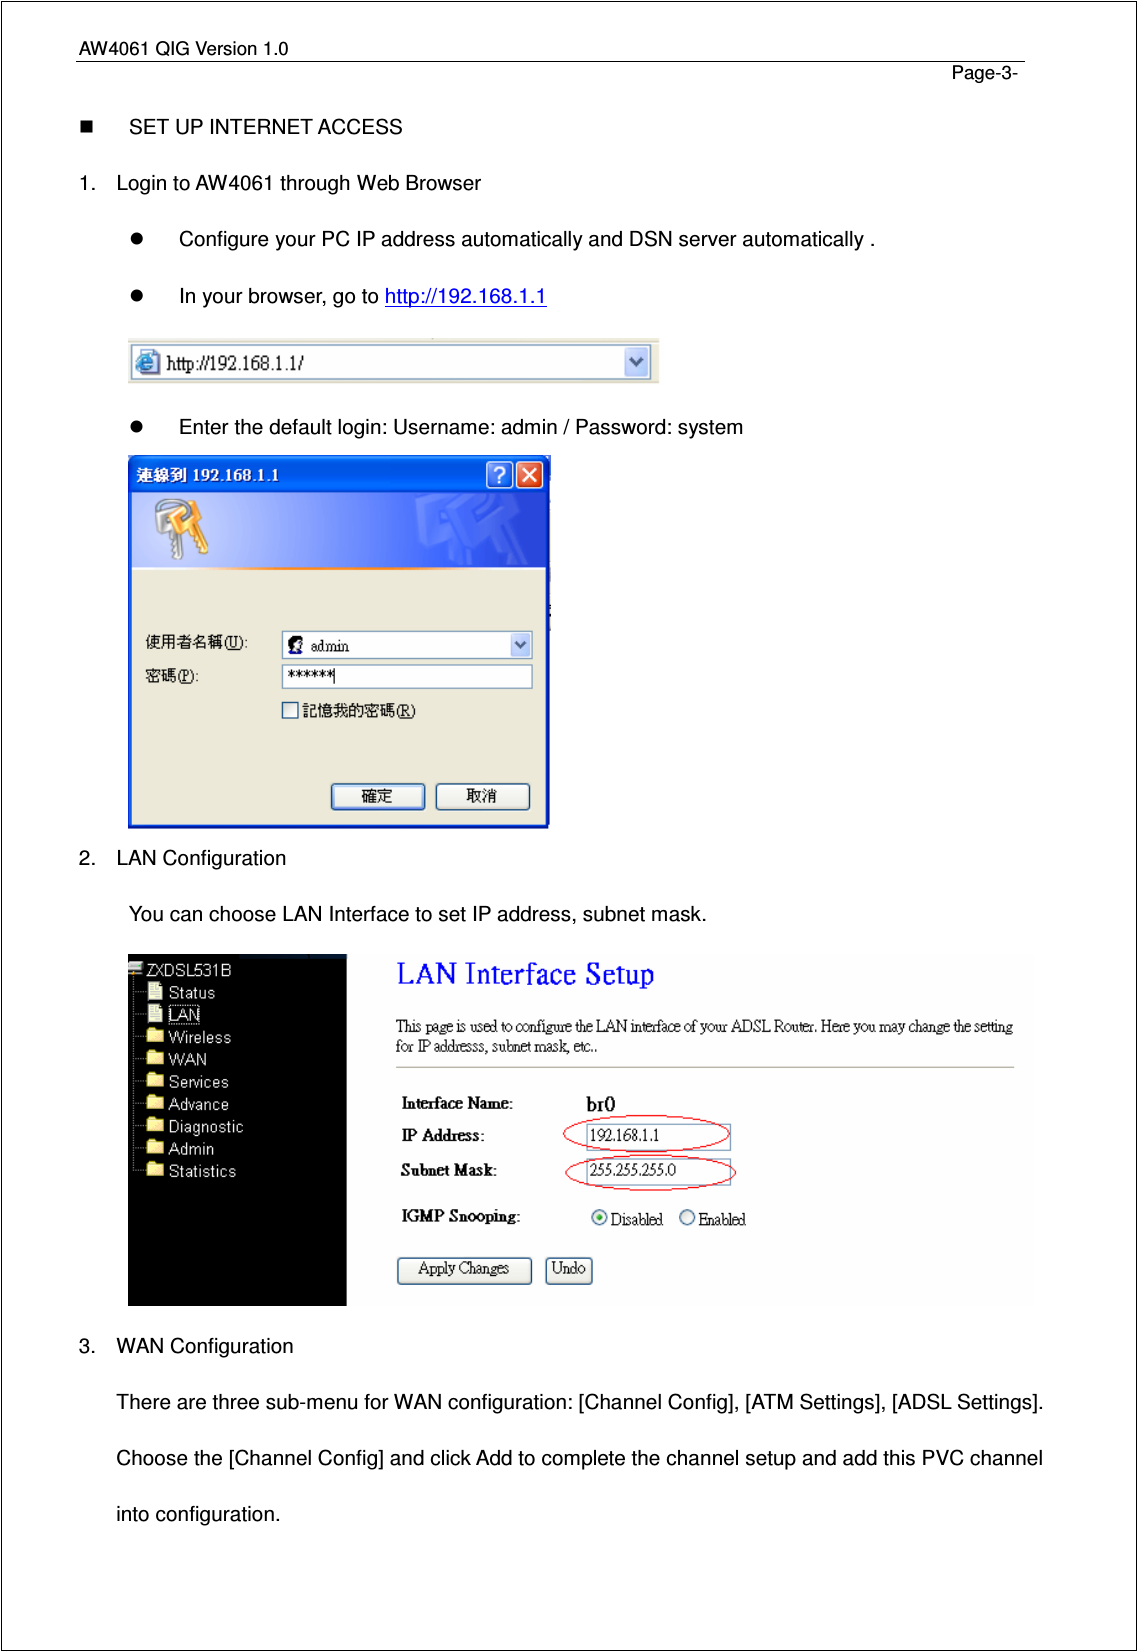 AW4061 QIG Version 1.0                                                                                                                                                                                                                                 Page-3-   SET UP INTERNET ACCESS 1.  Login to AW4061 through Web Browser   Configure your PC IP address automatically and DSN server automatically .   In your browser, go to http://192.168.1.1    Enter the default login: Username: admin / Password: system  2.  LAN Configuration You can choose LAN Interface to set IP address, subnet mask.  3.  WAN Configuration There are three sub-menu for WAN configuration: [Channel Config], [ATM Settings], [ADSL Settings]. Choose the [Channel Config] and click Add to complete the channel setup and add this PVC channel into configuration. 